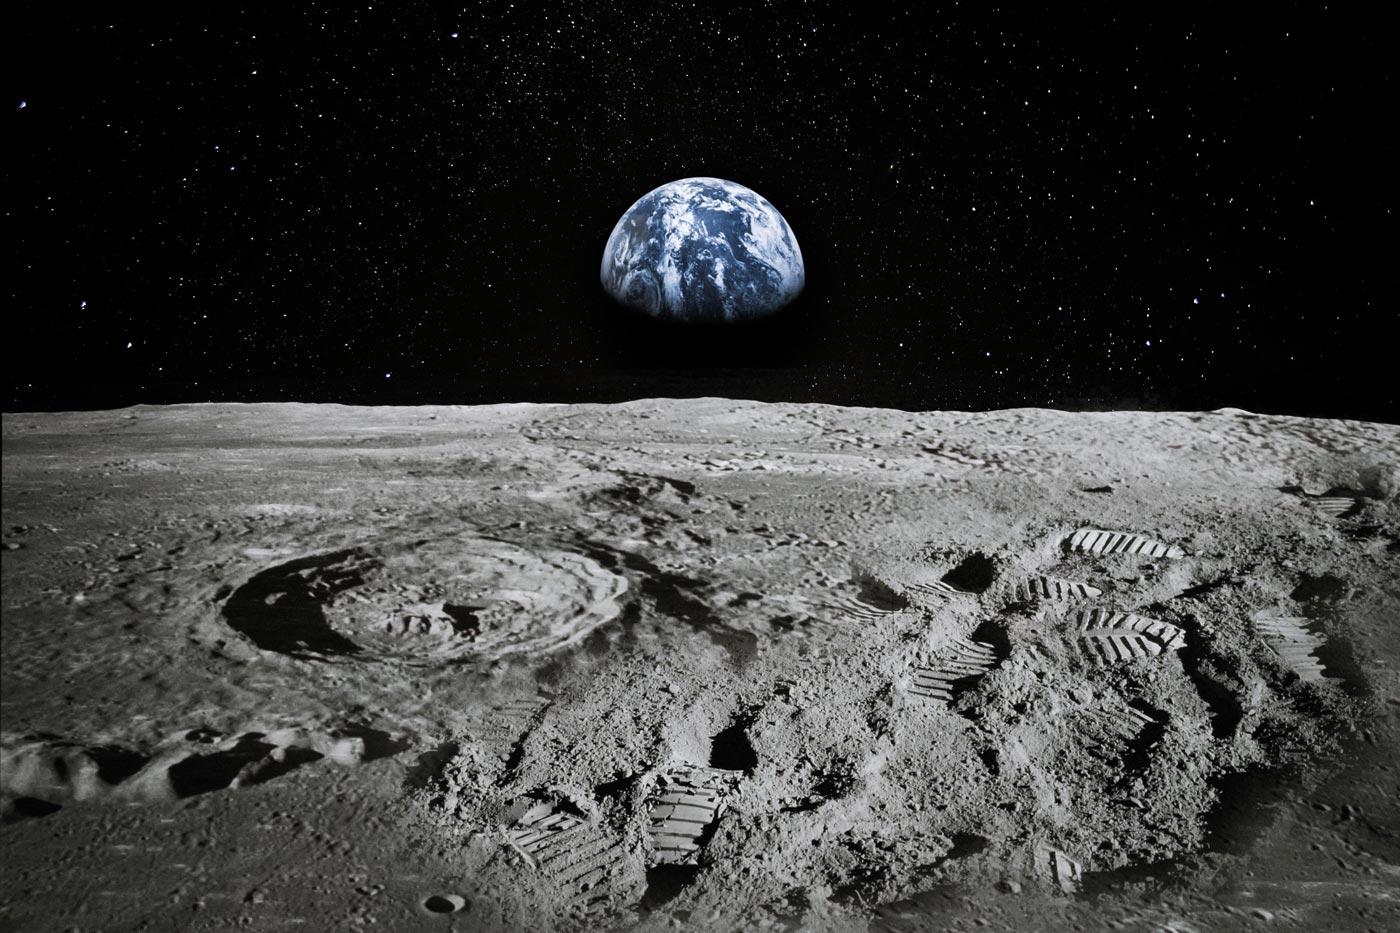 Winston Churchill wrote a scientific paper discussing the possibility of life on the moon but concluded that the existence of lunar life was unlikely